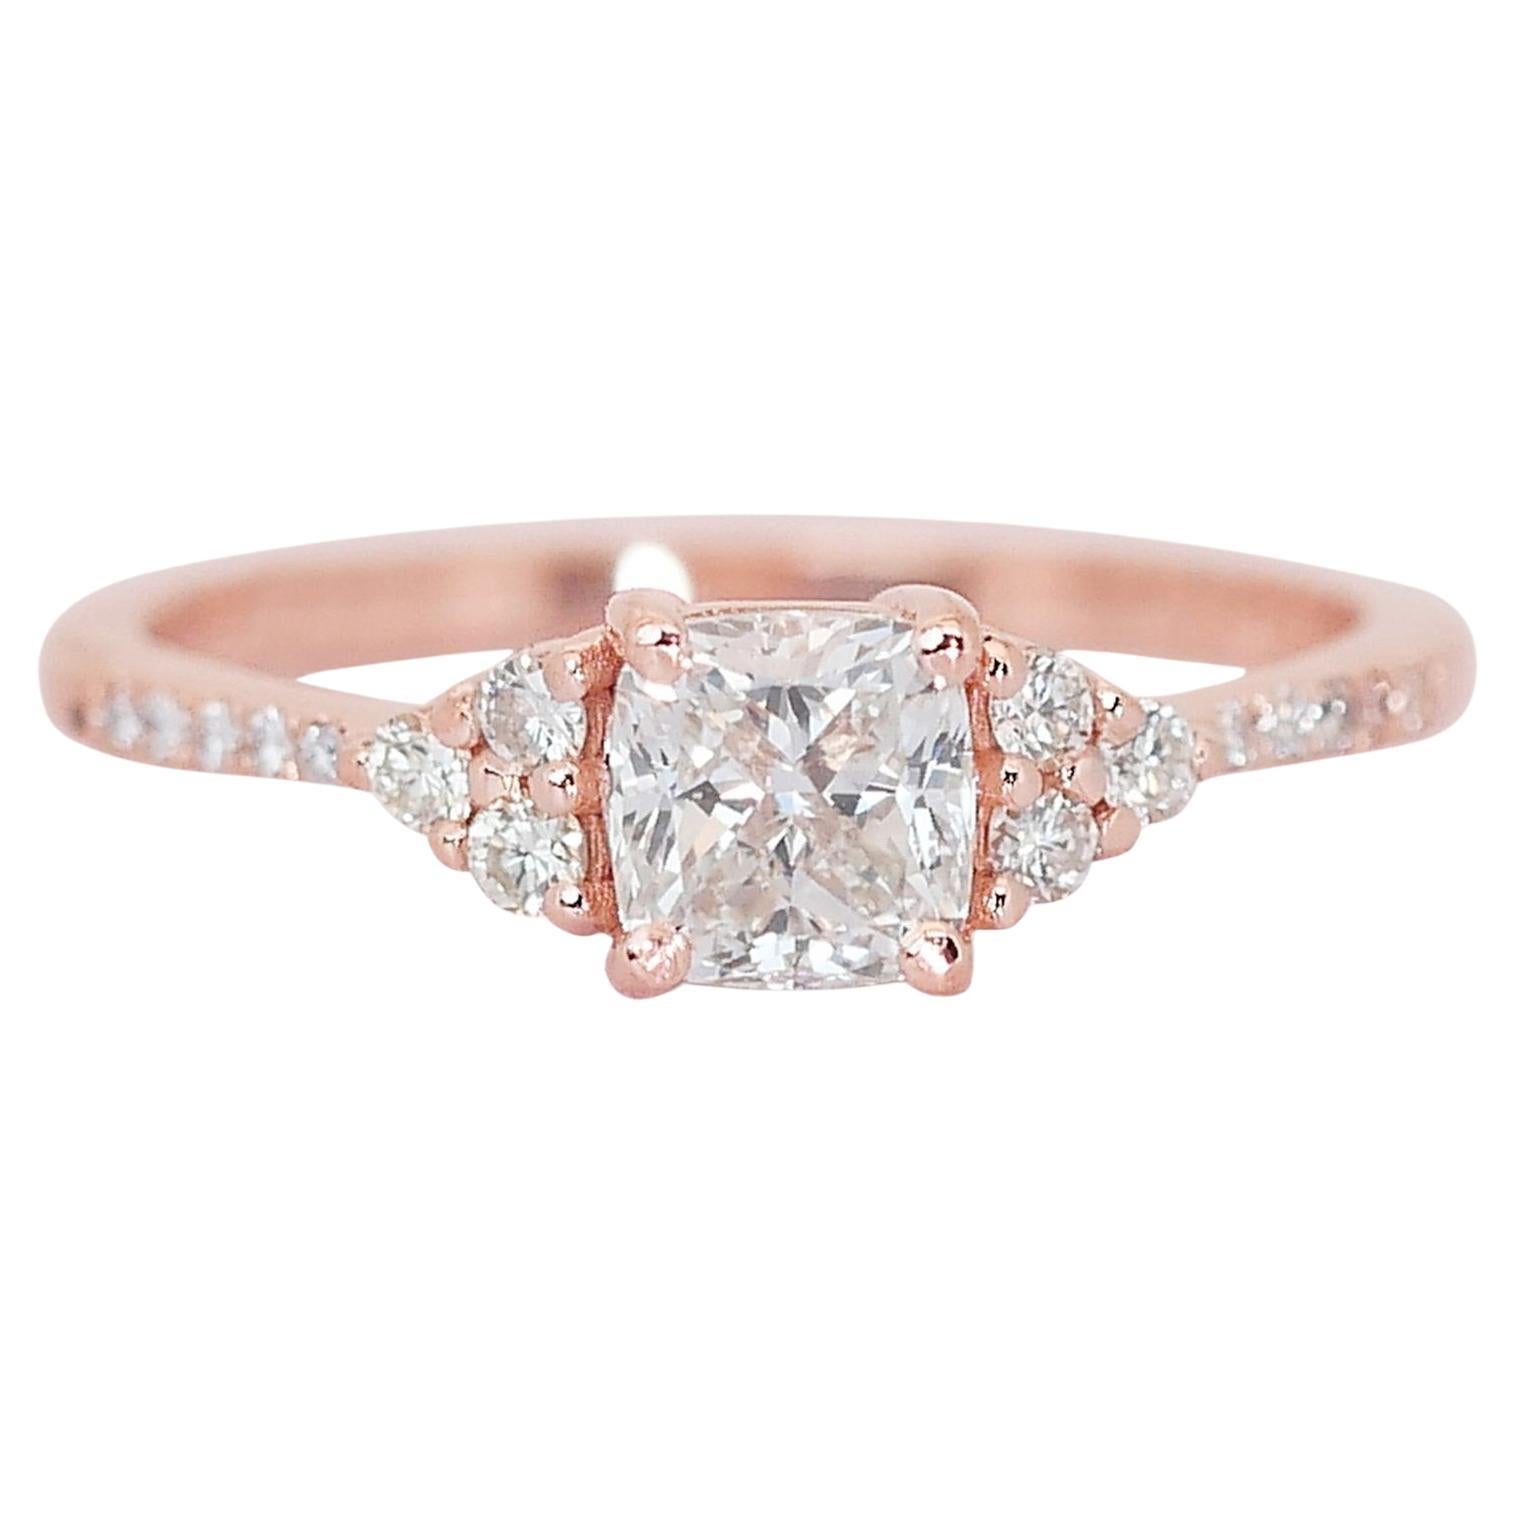 Sophisticated 1.65ct Diamonds Pave Ring in 14k Rose Gold - GIA Certified For Sale